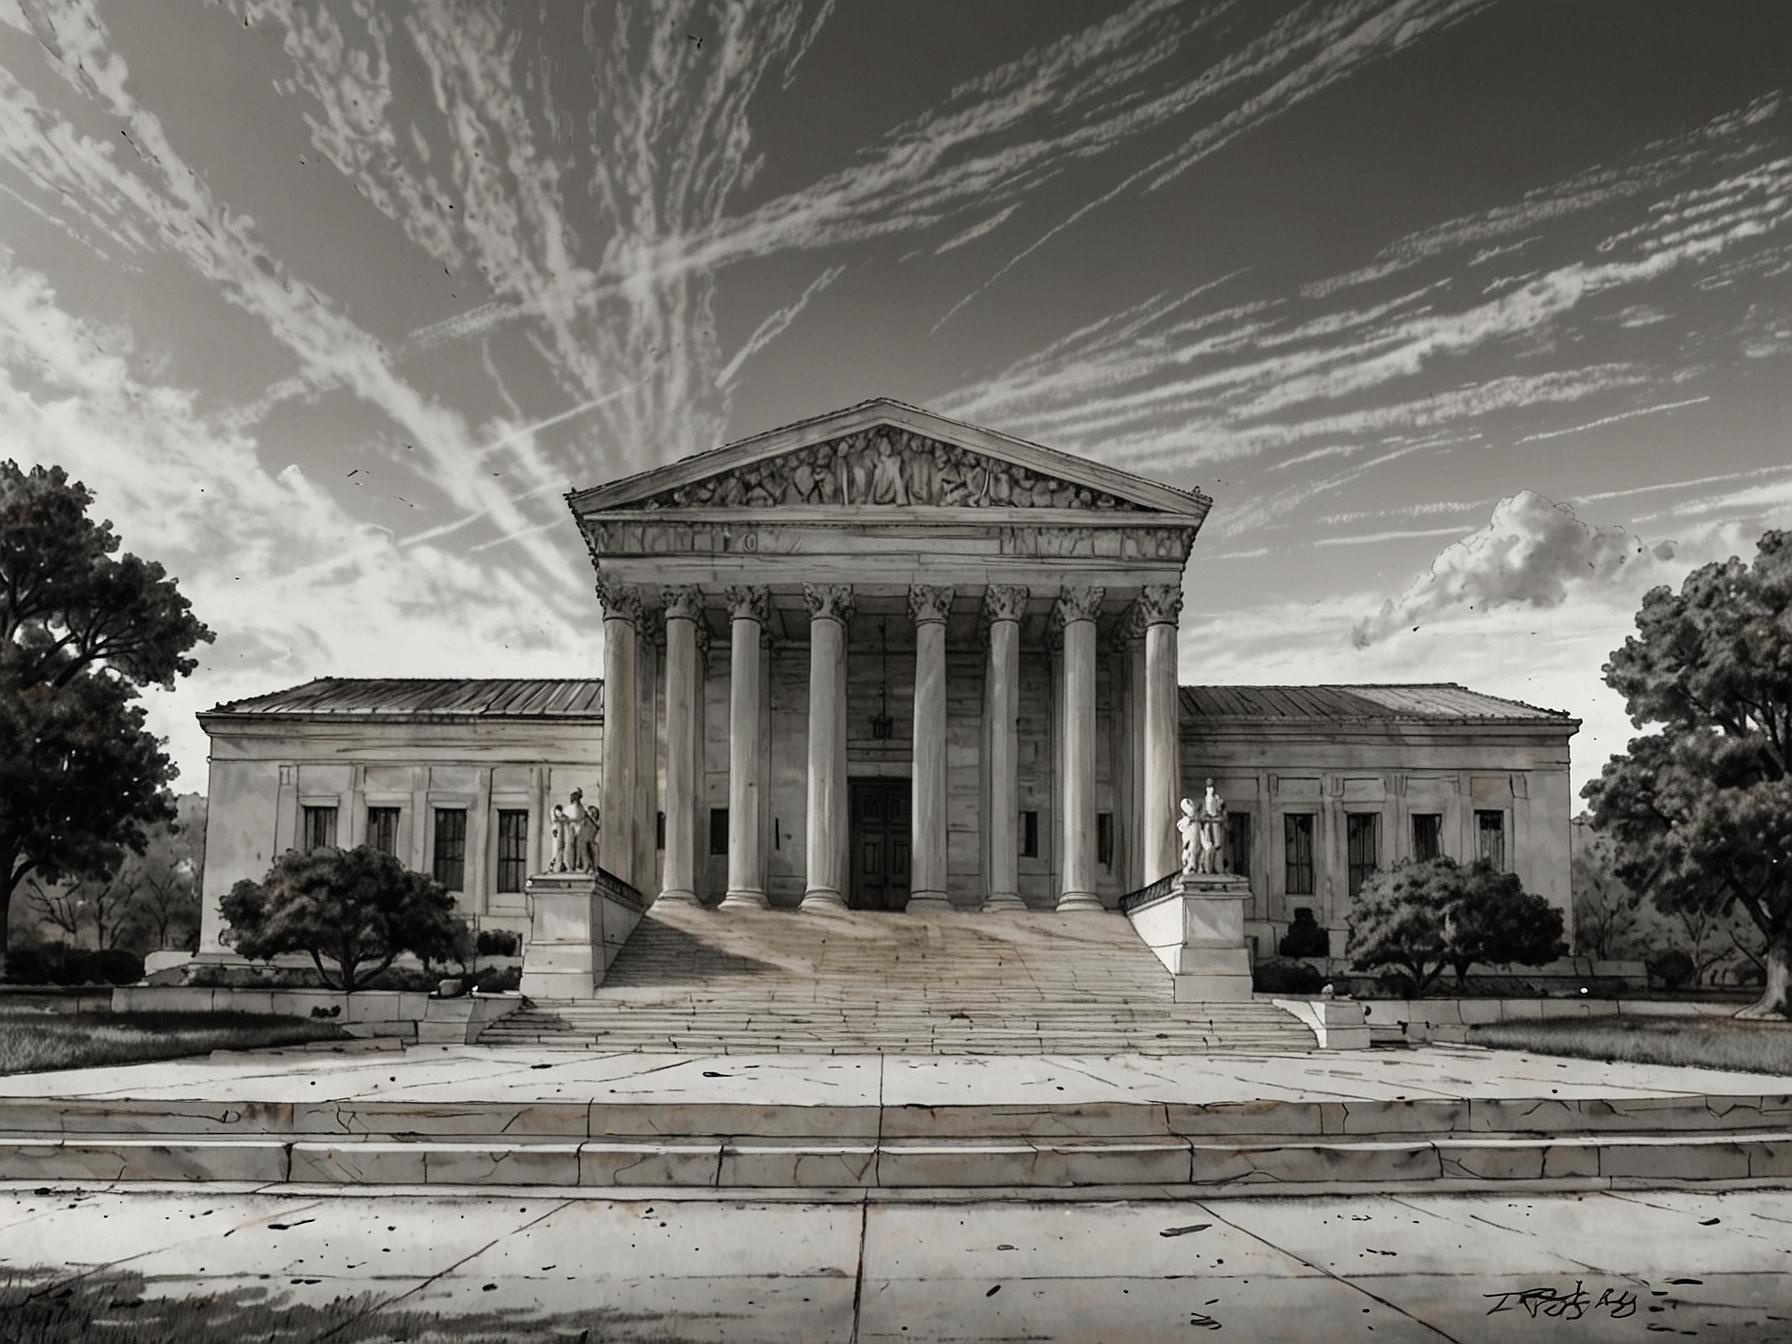 An image of the Supreme Court building, capturing the historic institution where monumental decisions like upholding laws against domestic abusers possessing guns are made.